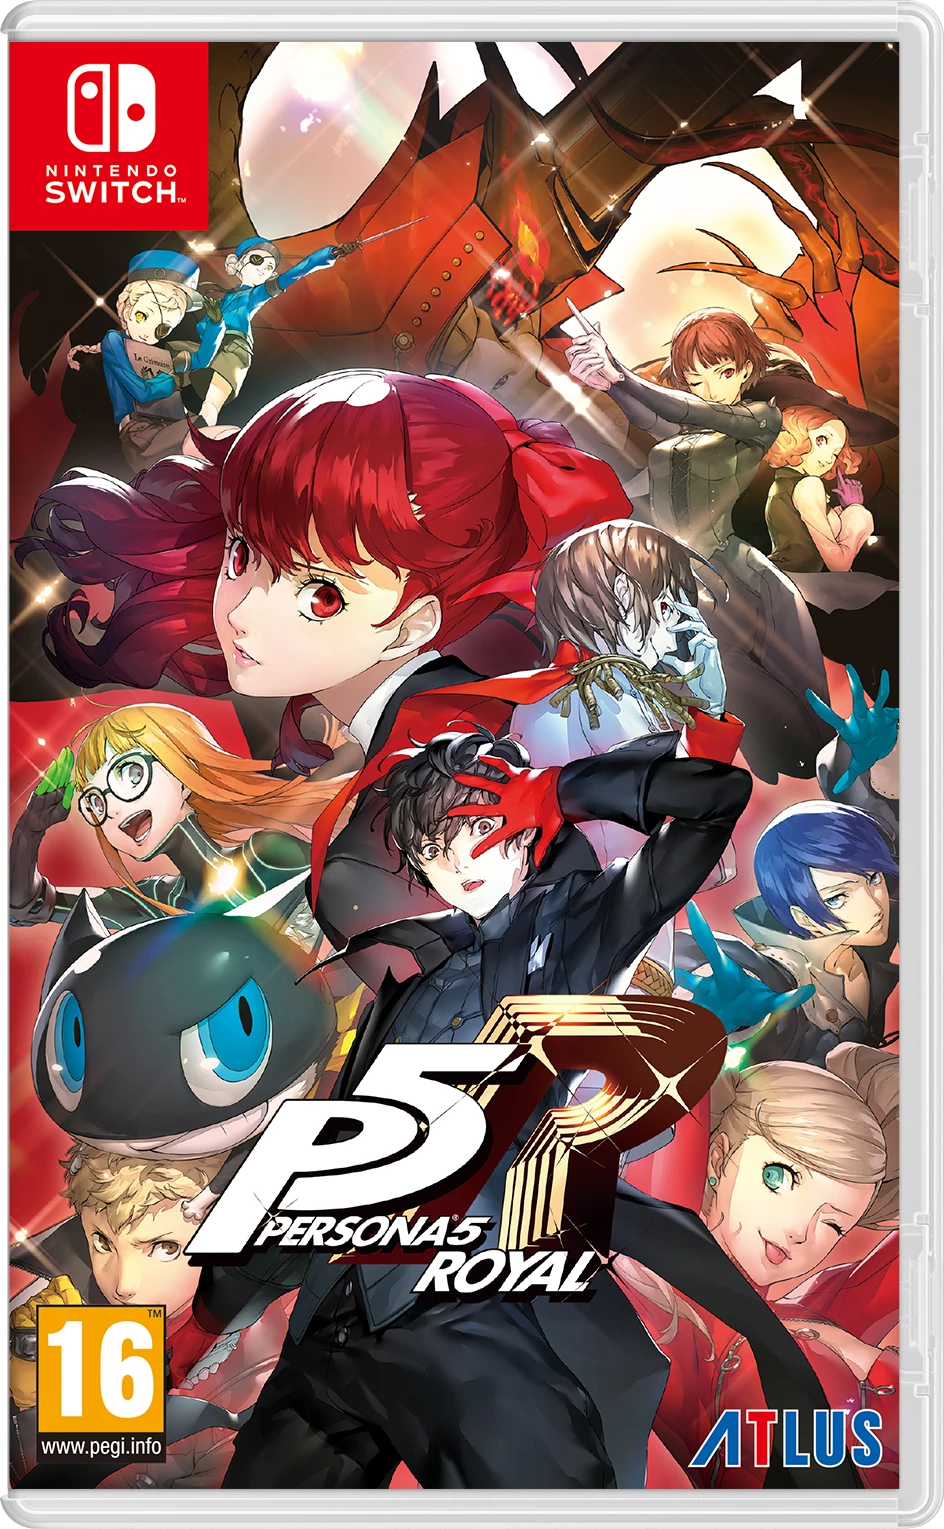 Persona 5 Royal (Switch), Atlus